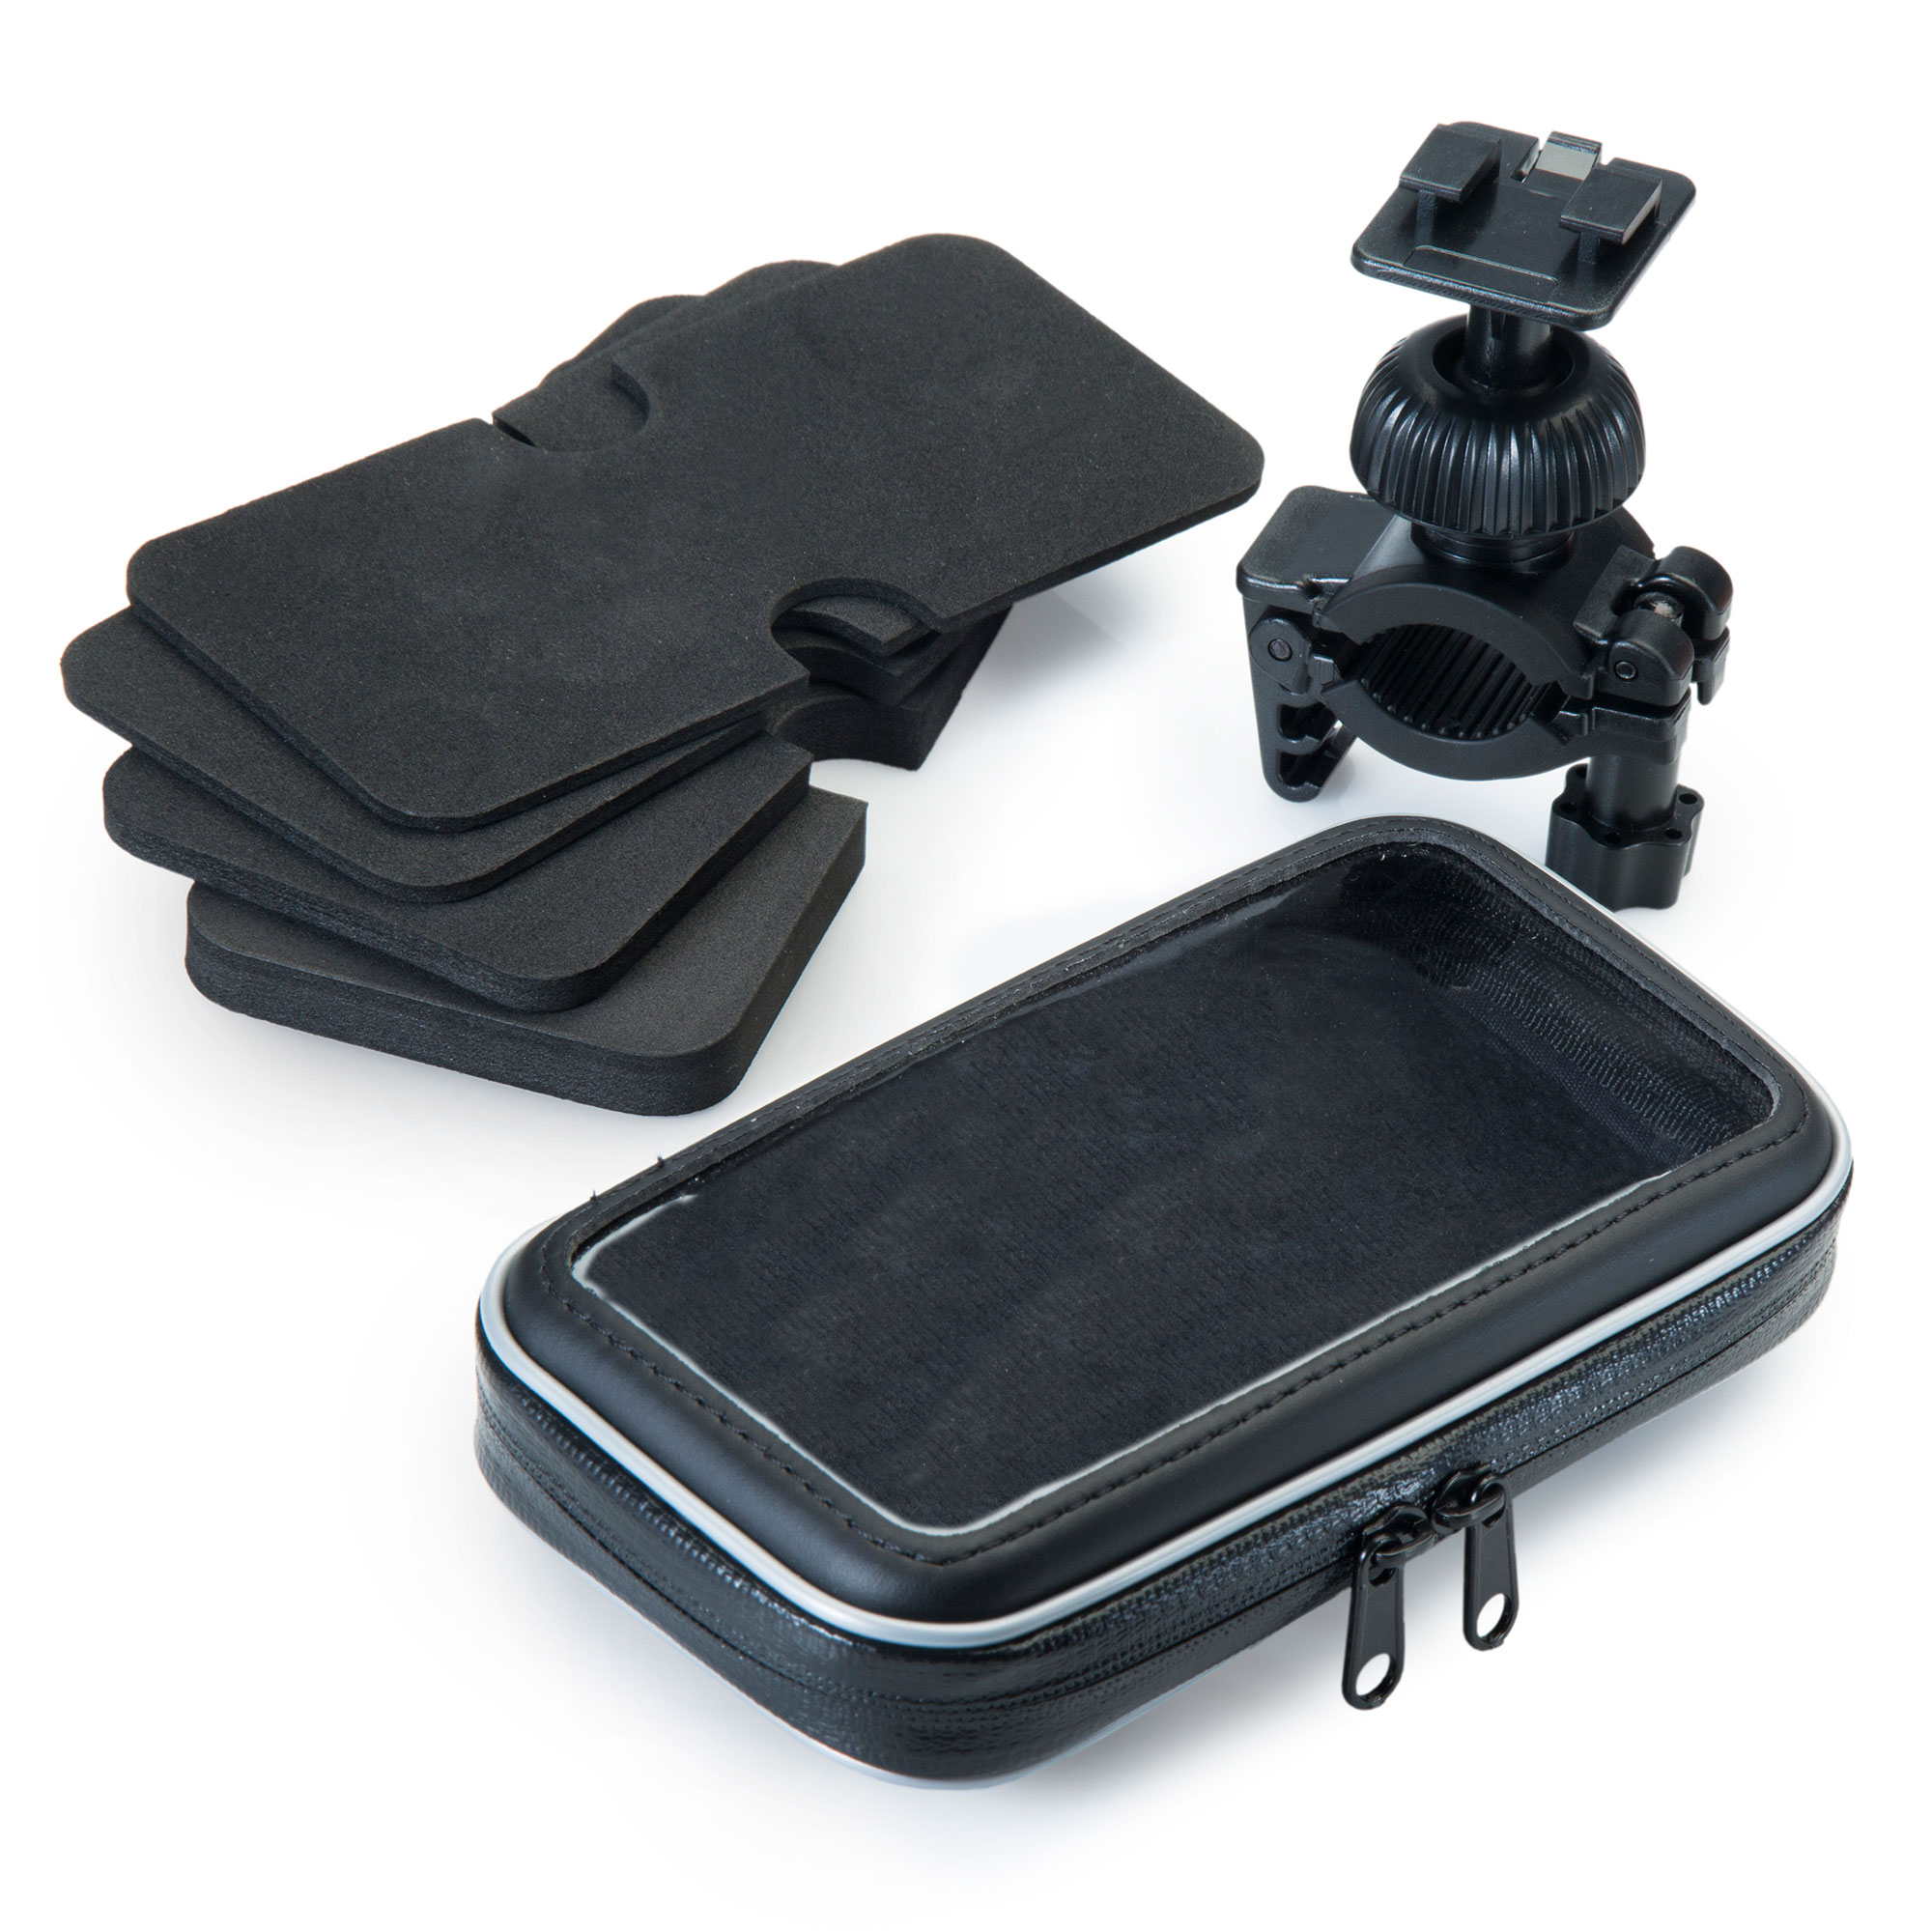 Heavy Duty Weather Resistant Bicycle / Motorcycle Handlebar Mount Holder Designed for the HTC Desire S